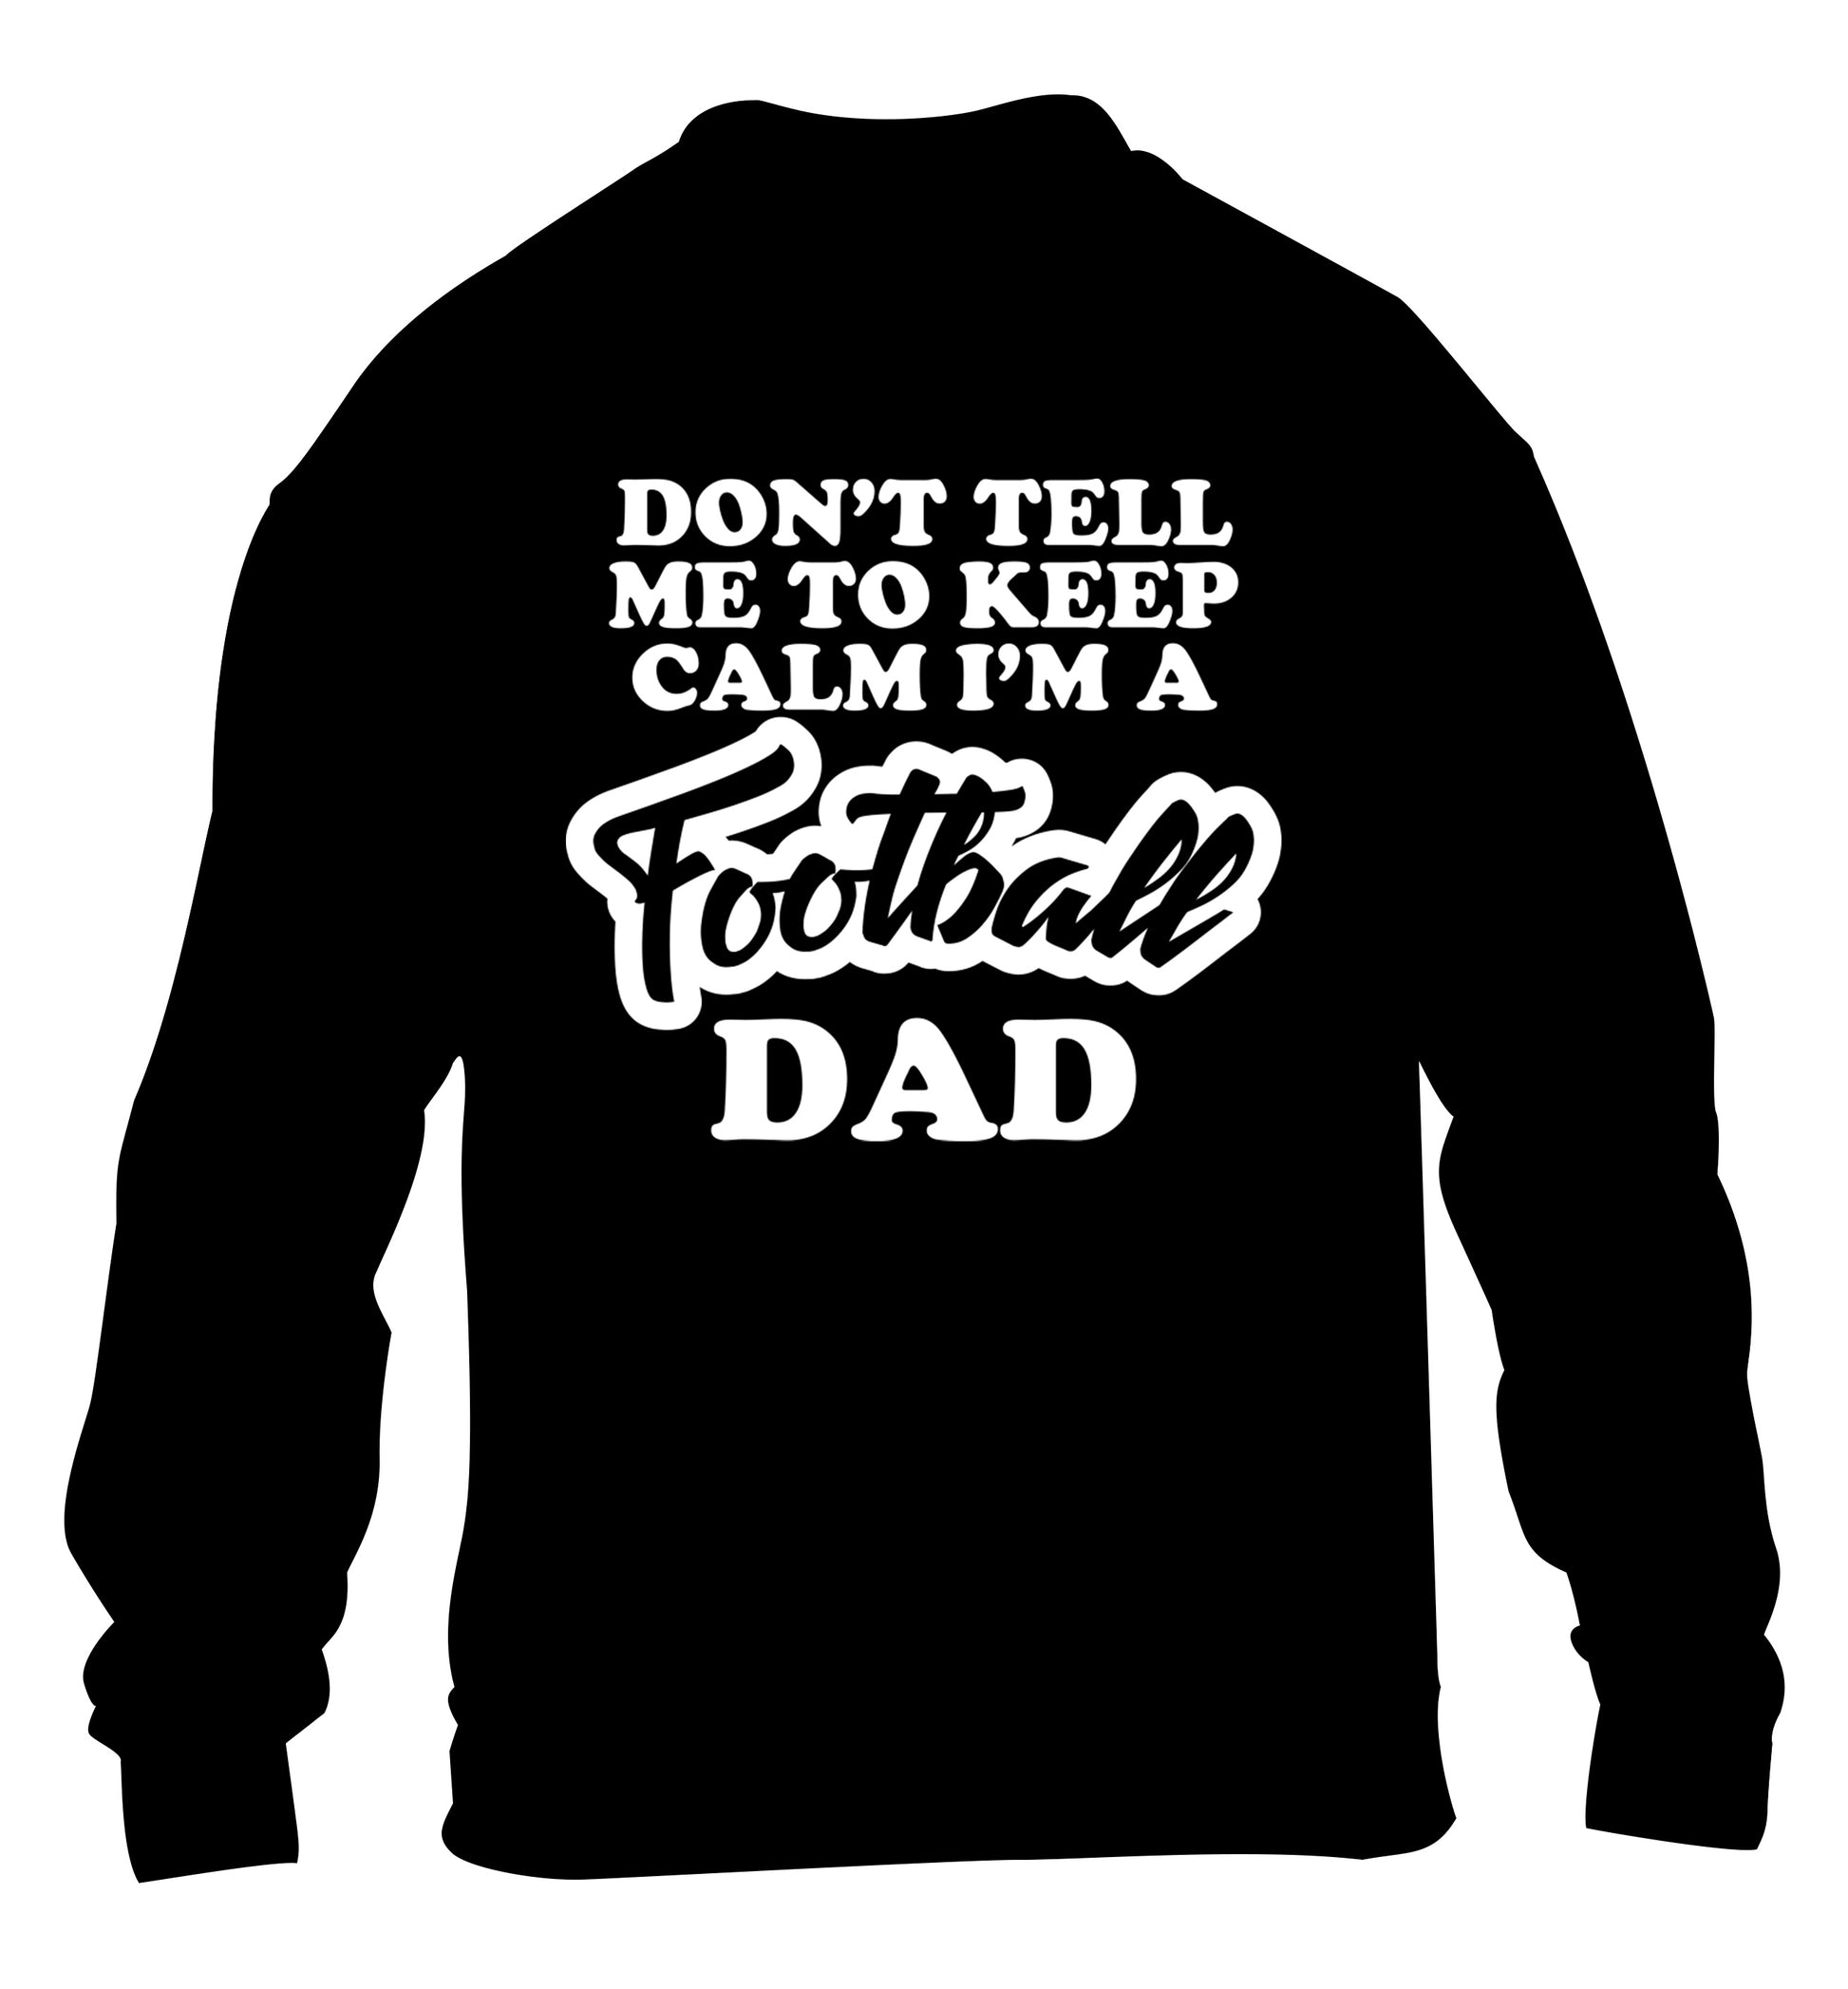 Don't tell me to keep calm I'm a football grandad children's black sweater 12-14 Years